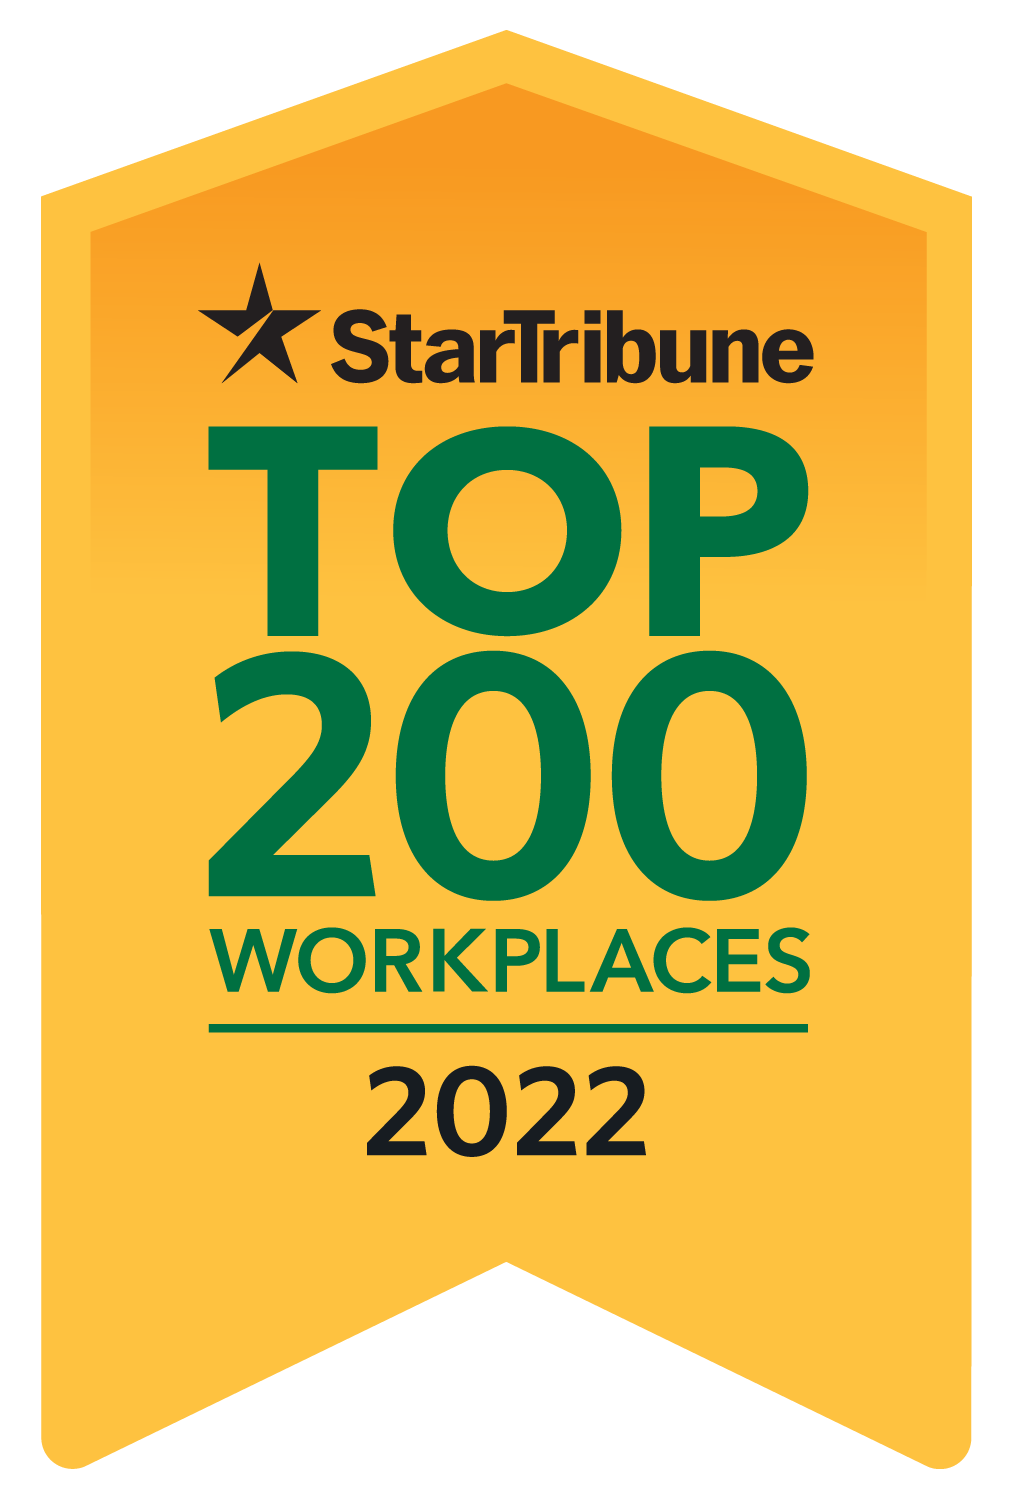 WSB named one of the Top 200 Workplaces in Minnesota by the Star